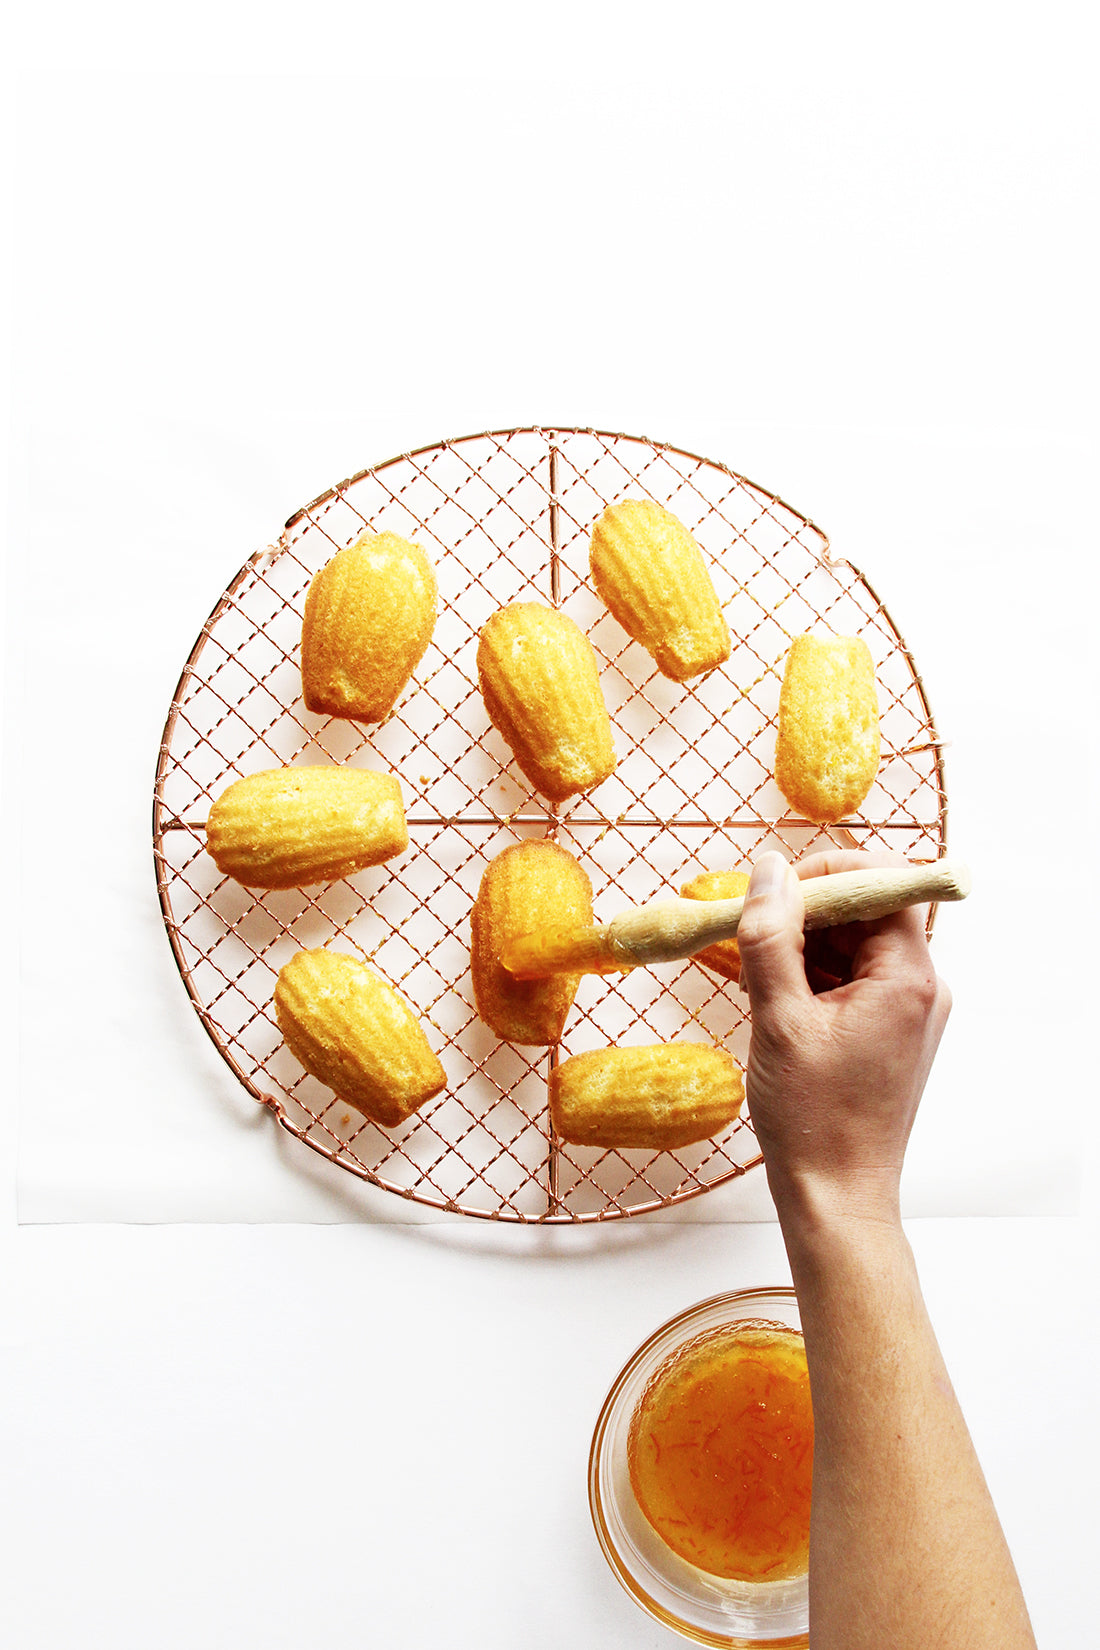 Image of nine Miss Jones Baking Co Marmalade Madeleines on a baking rack being glazed with orange marmalade by a hand